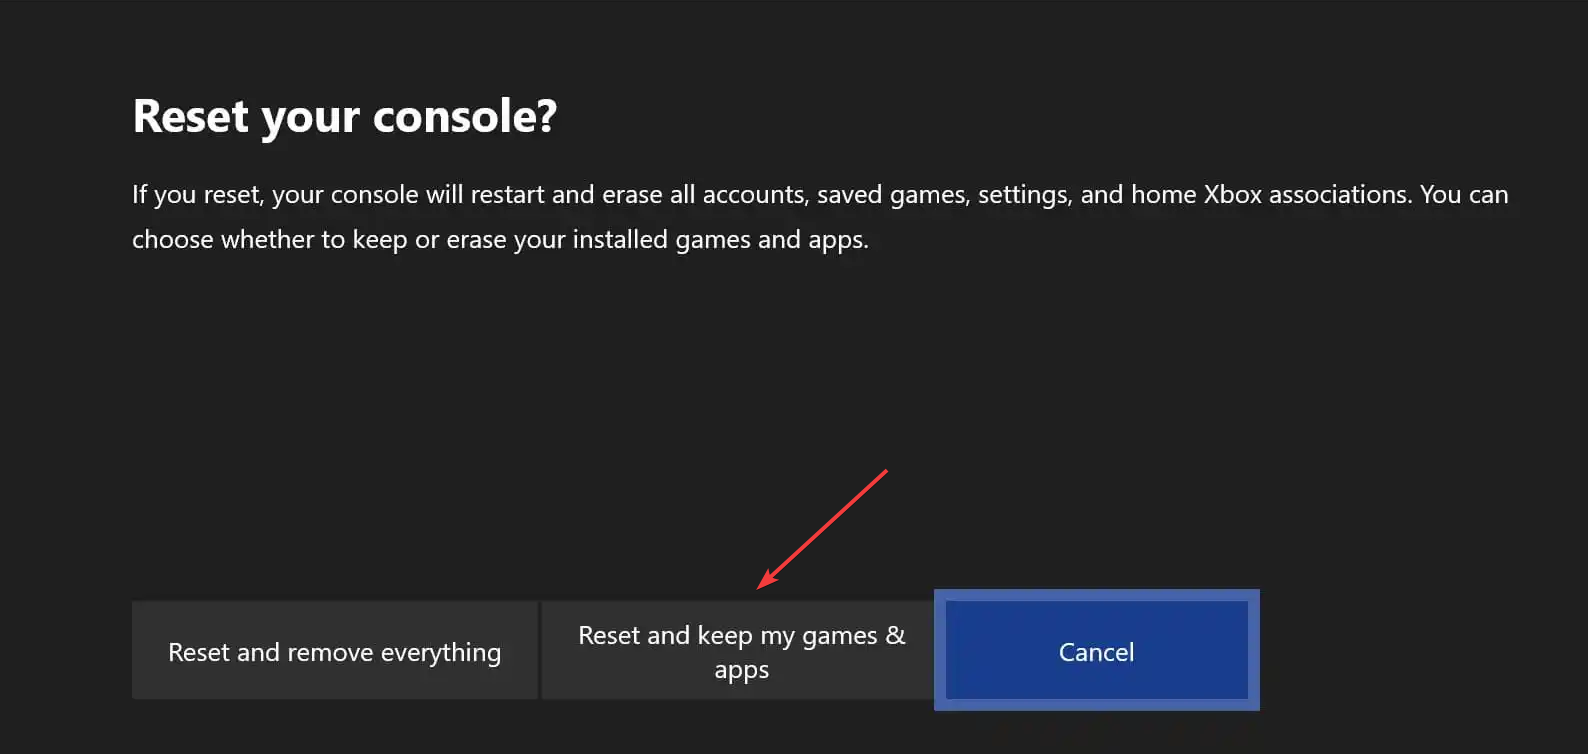 xbox one system error e208 Reset and keep my games & apps